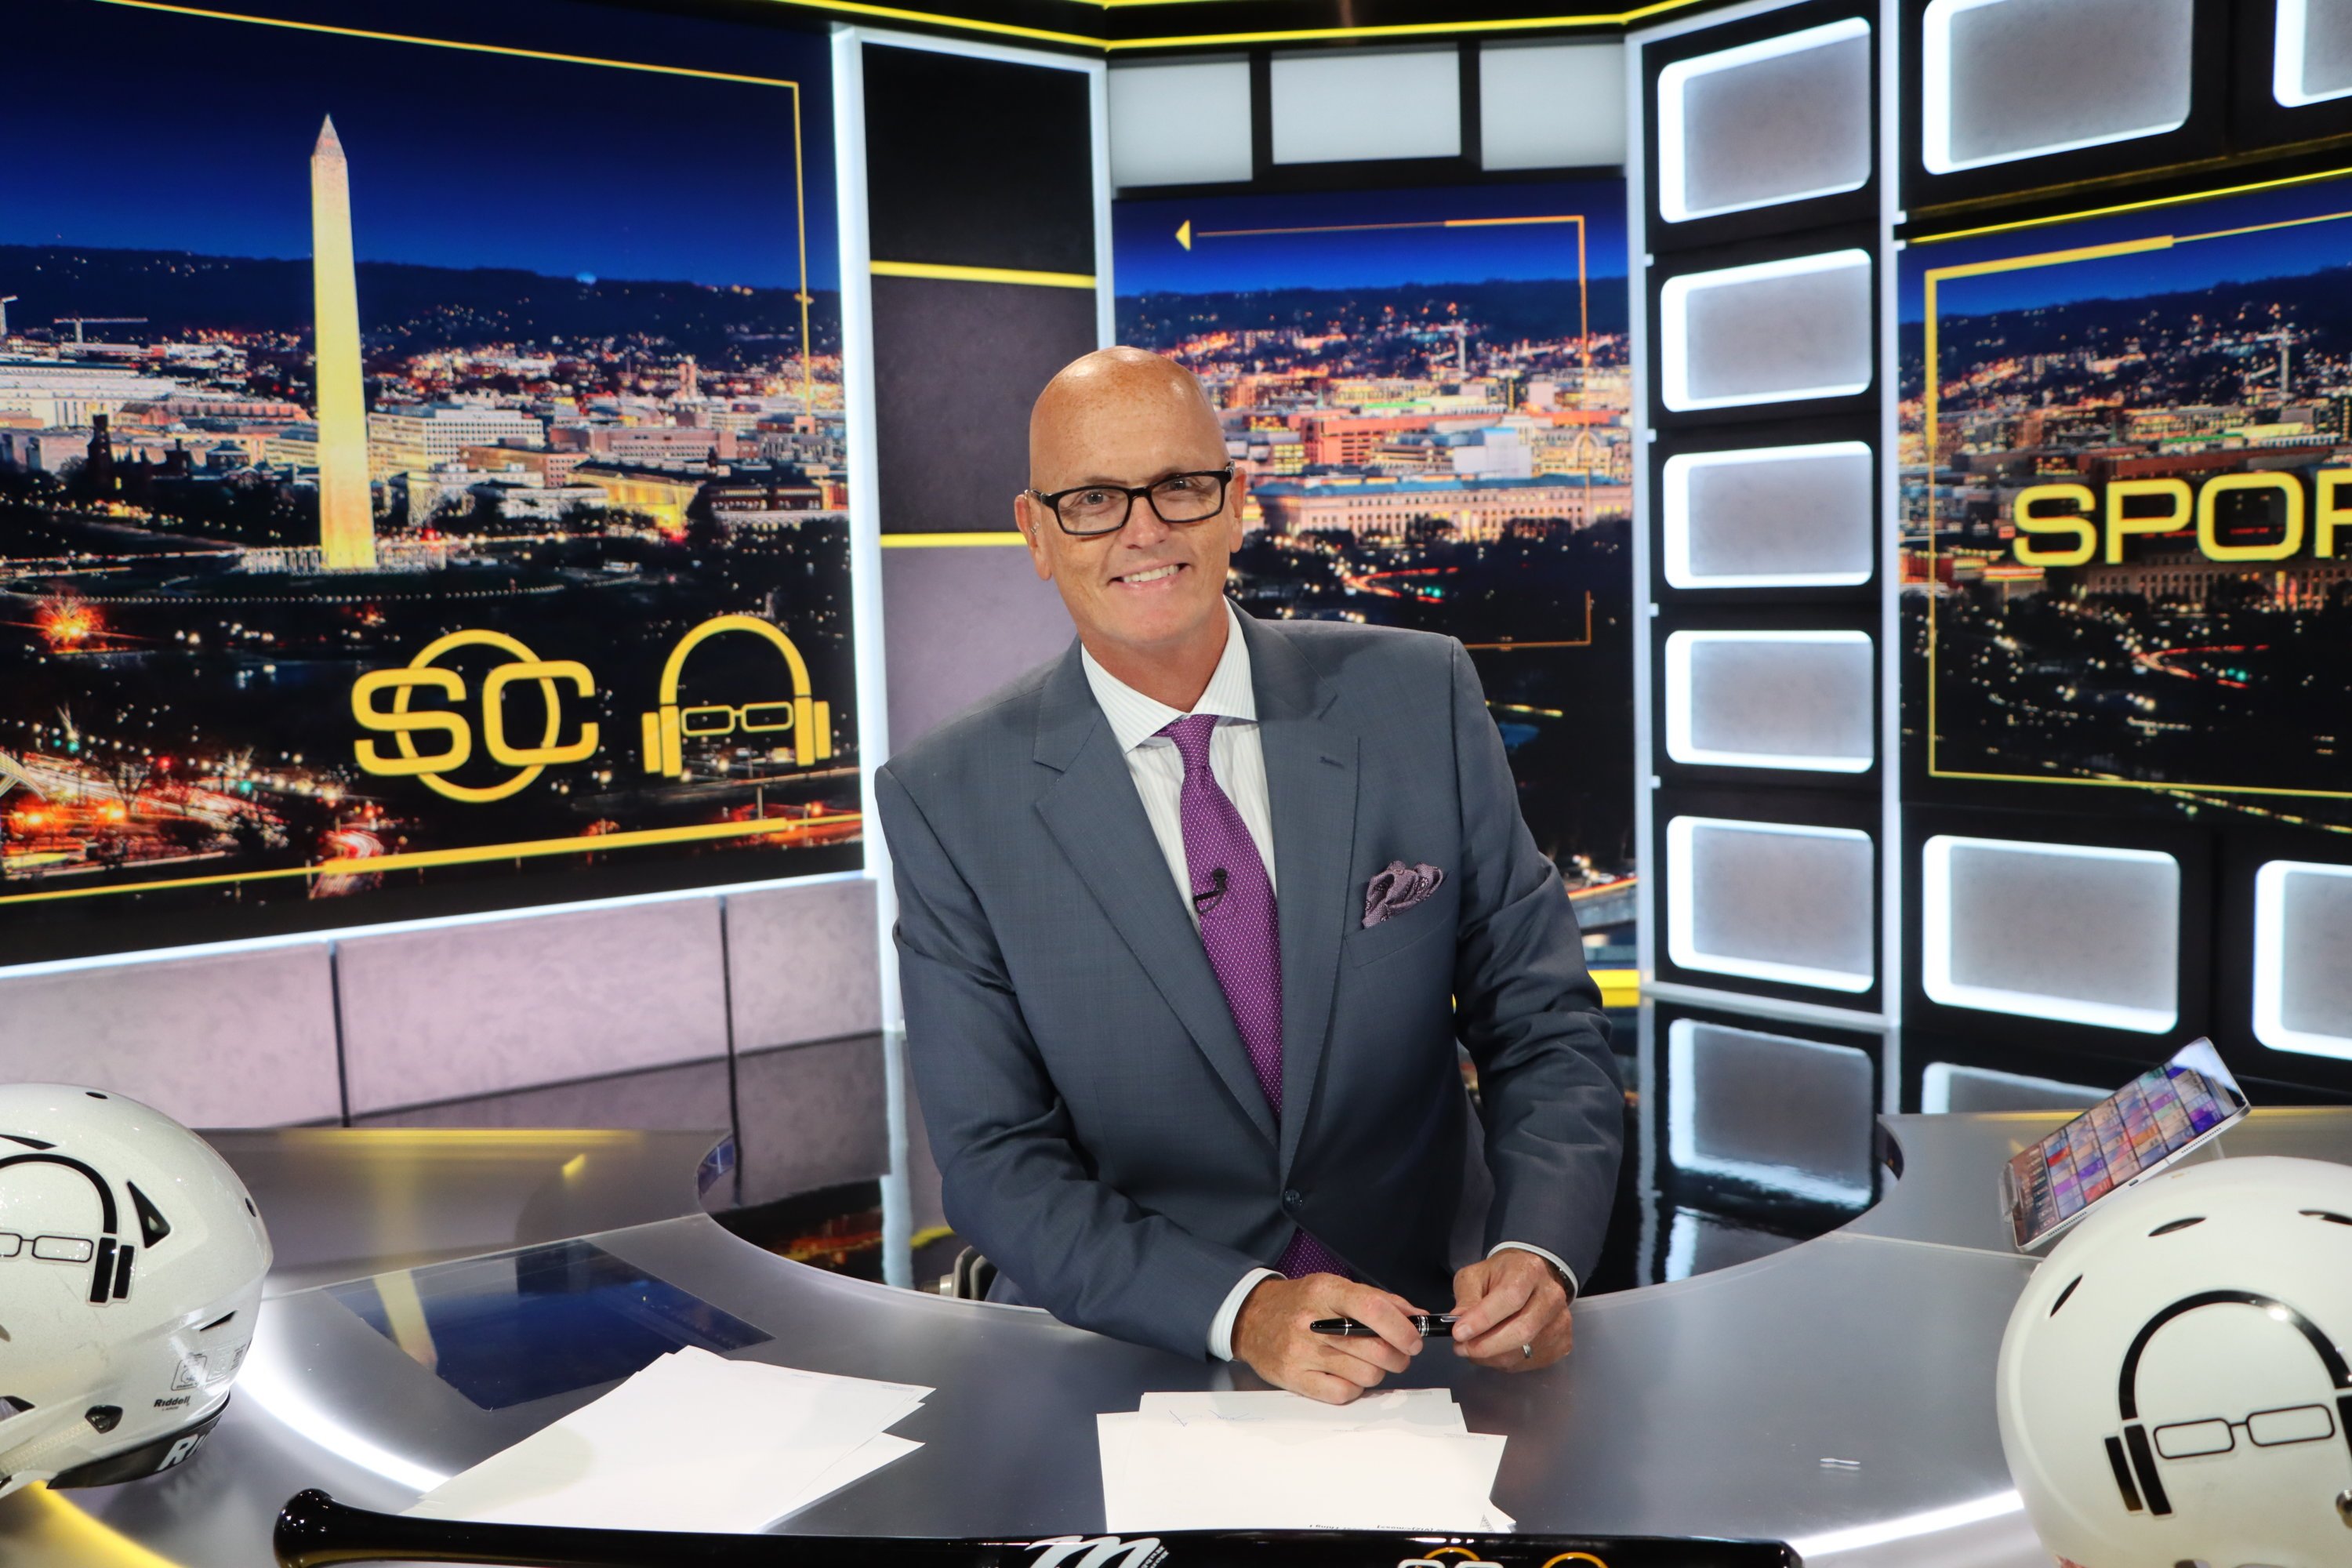 ESPN's SportsCenter Is Now Using a Famous DC Go-Go Band for Its Theme Music  - Washingtonian